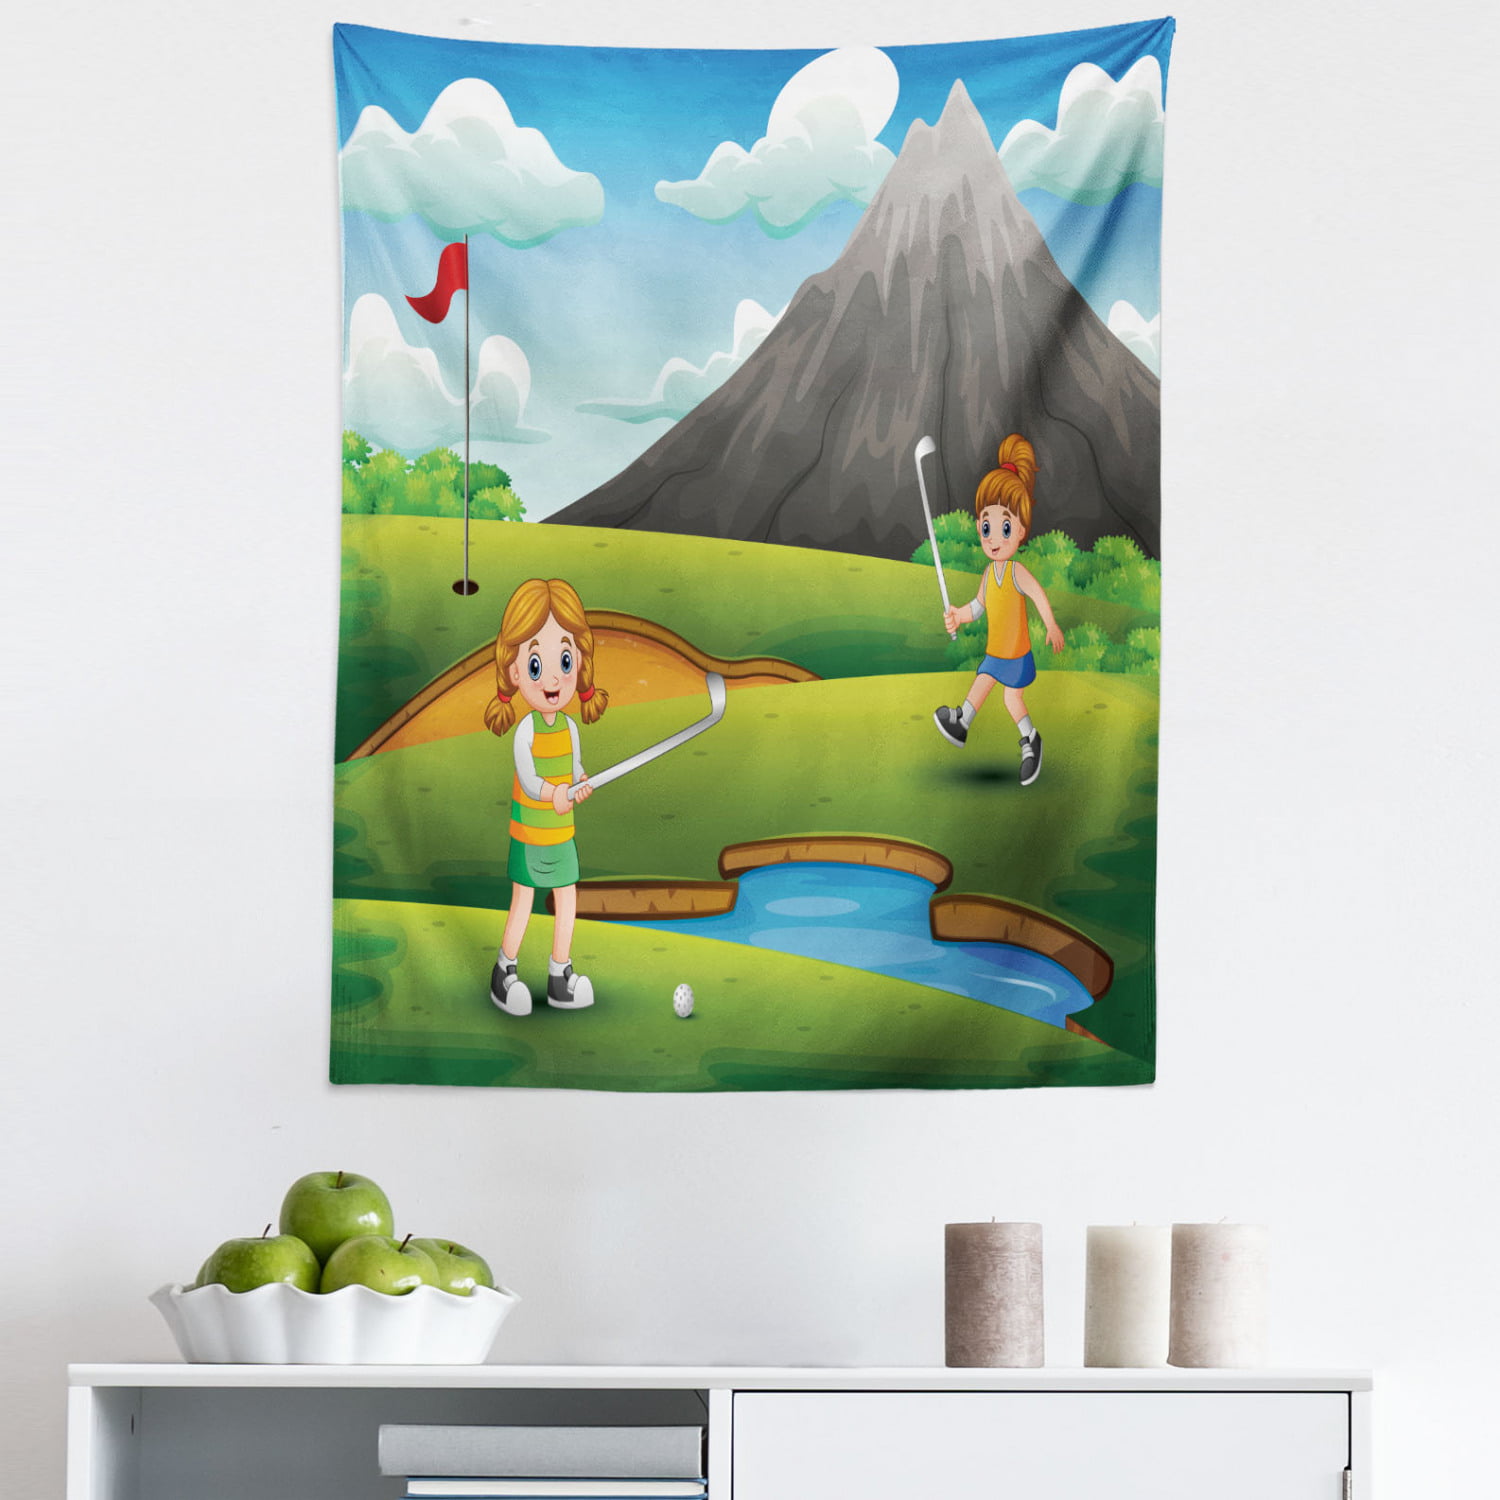 Golf Course Scene Tapestry, Happy Golfer on Field in a Sunny Day Cartoon  Scene, Fabric Wall Hanging Decor for Bedroom Living Room Dorm, 5 Sizes,  Apple Green Multicolor, by Ambesonne 